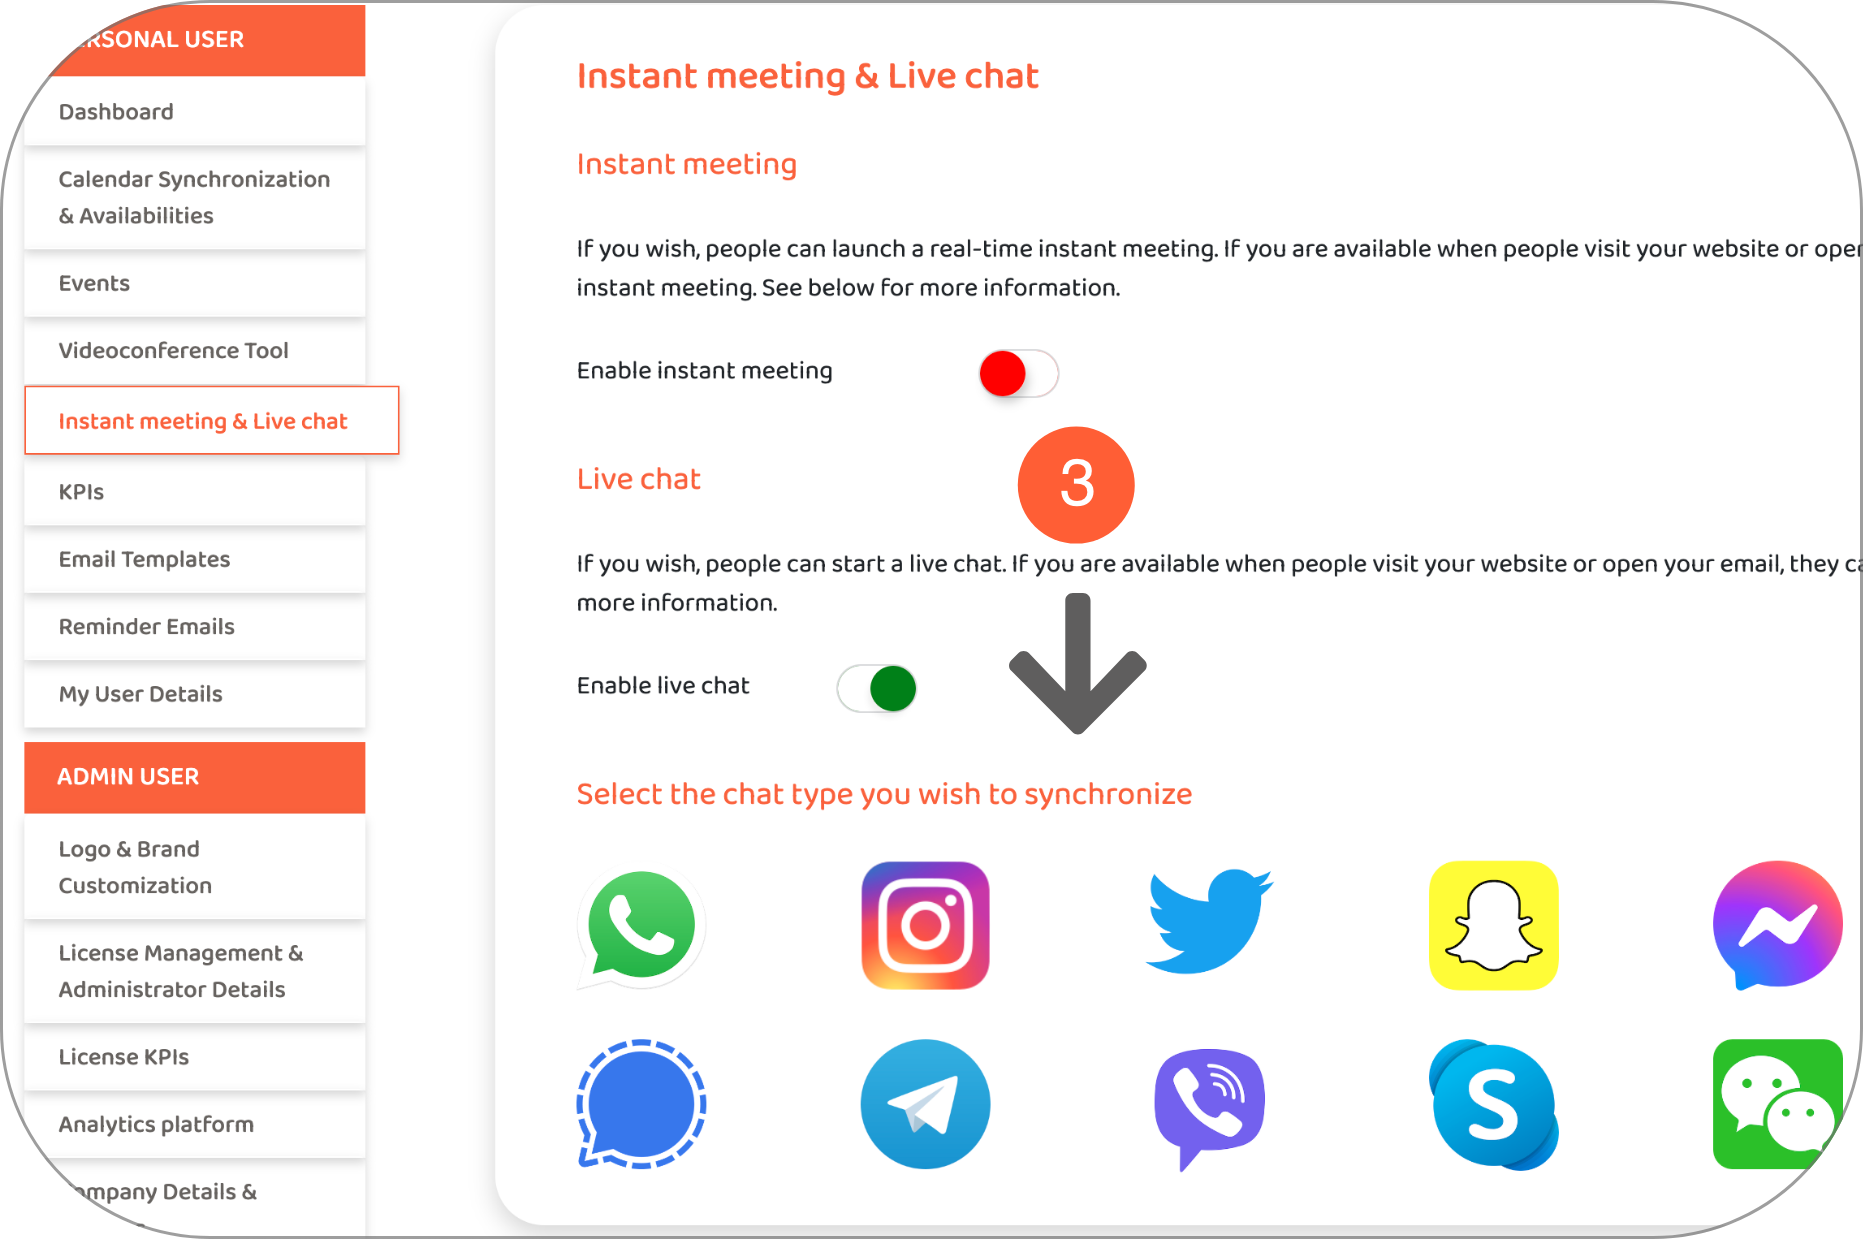 3 - activer live chat